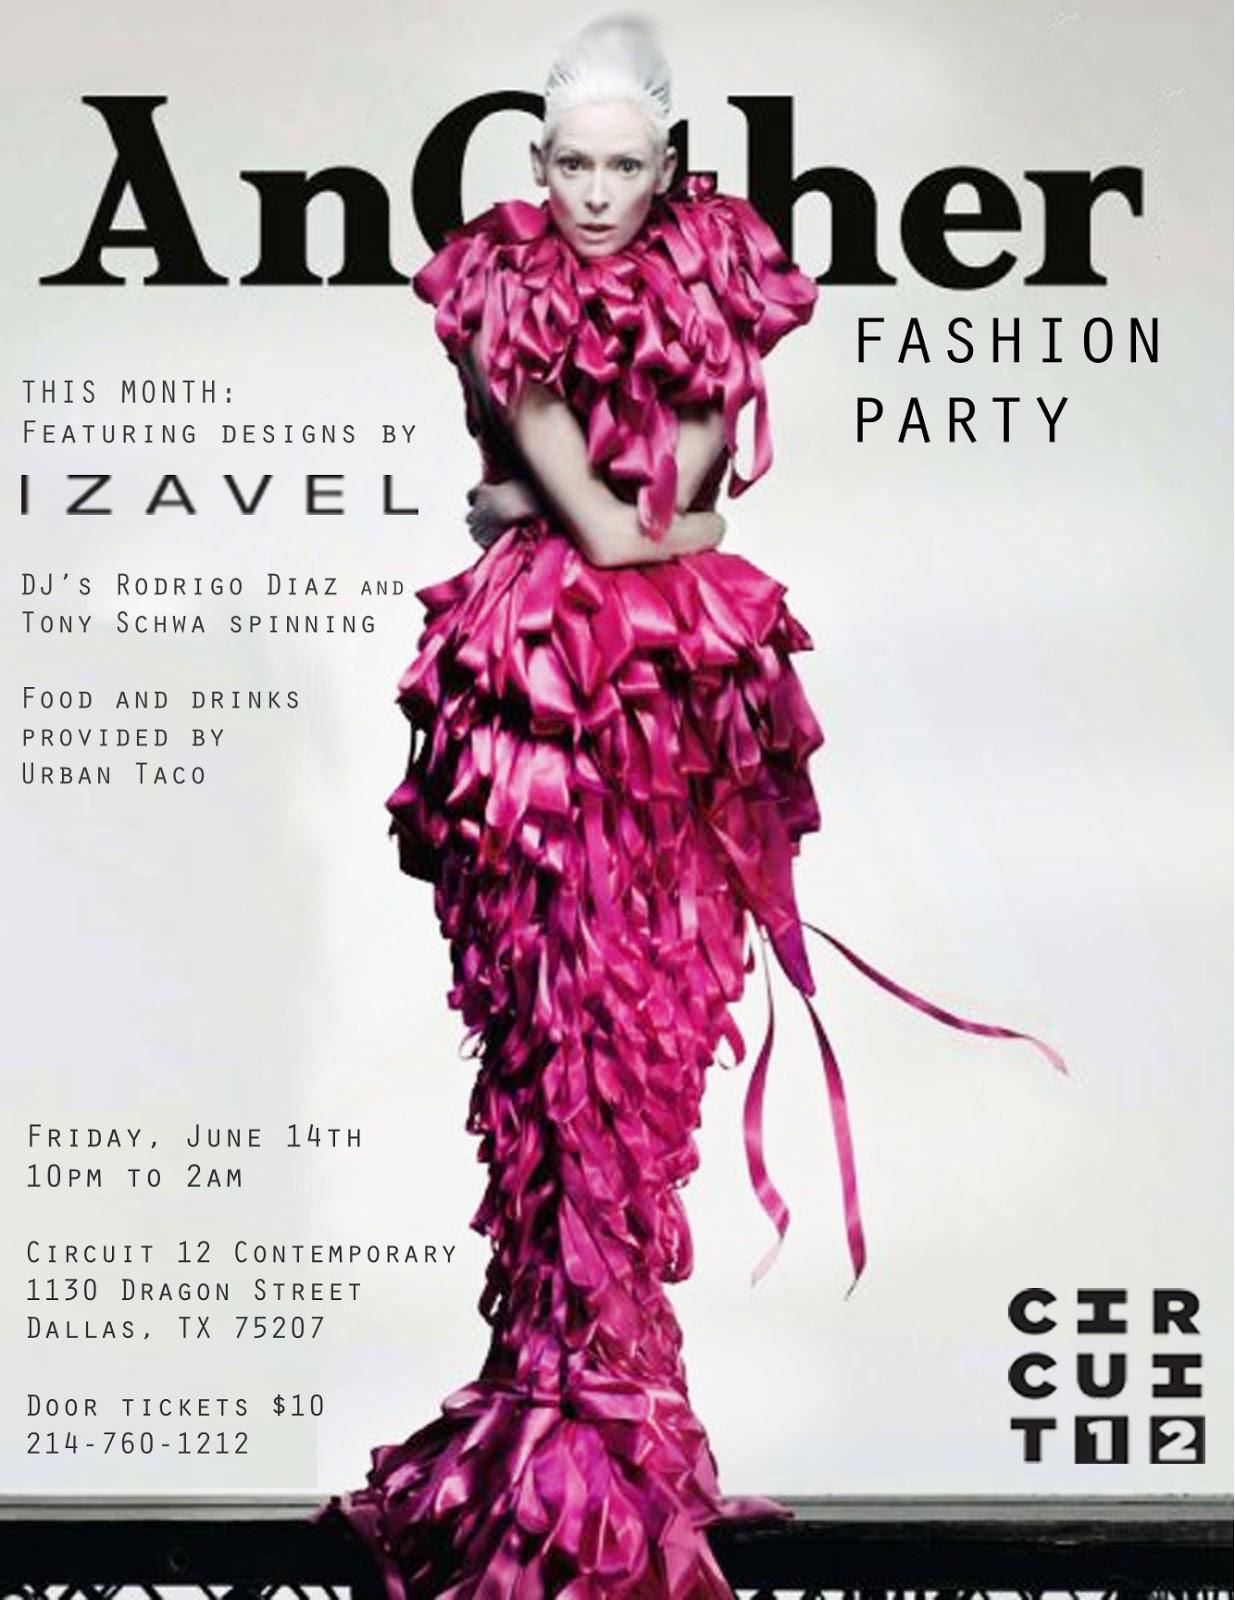 ANOTHER Fashion Party debuts at Circuit12 Contemporary featuring IZAVEL